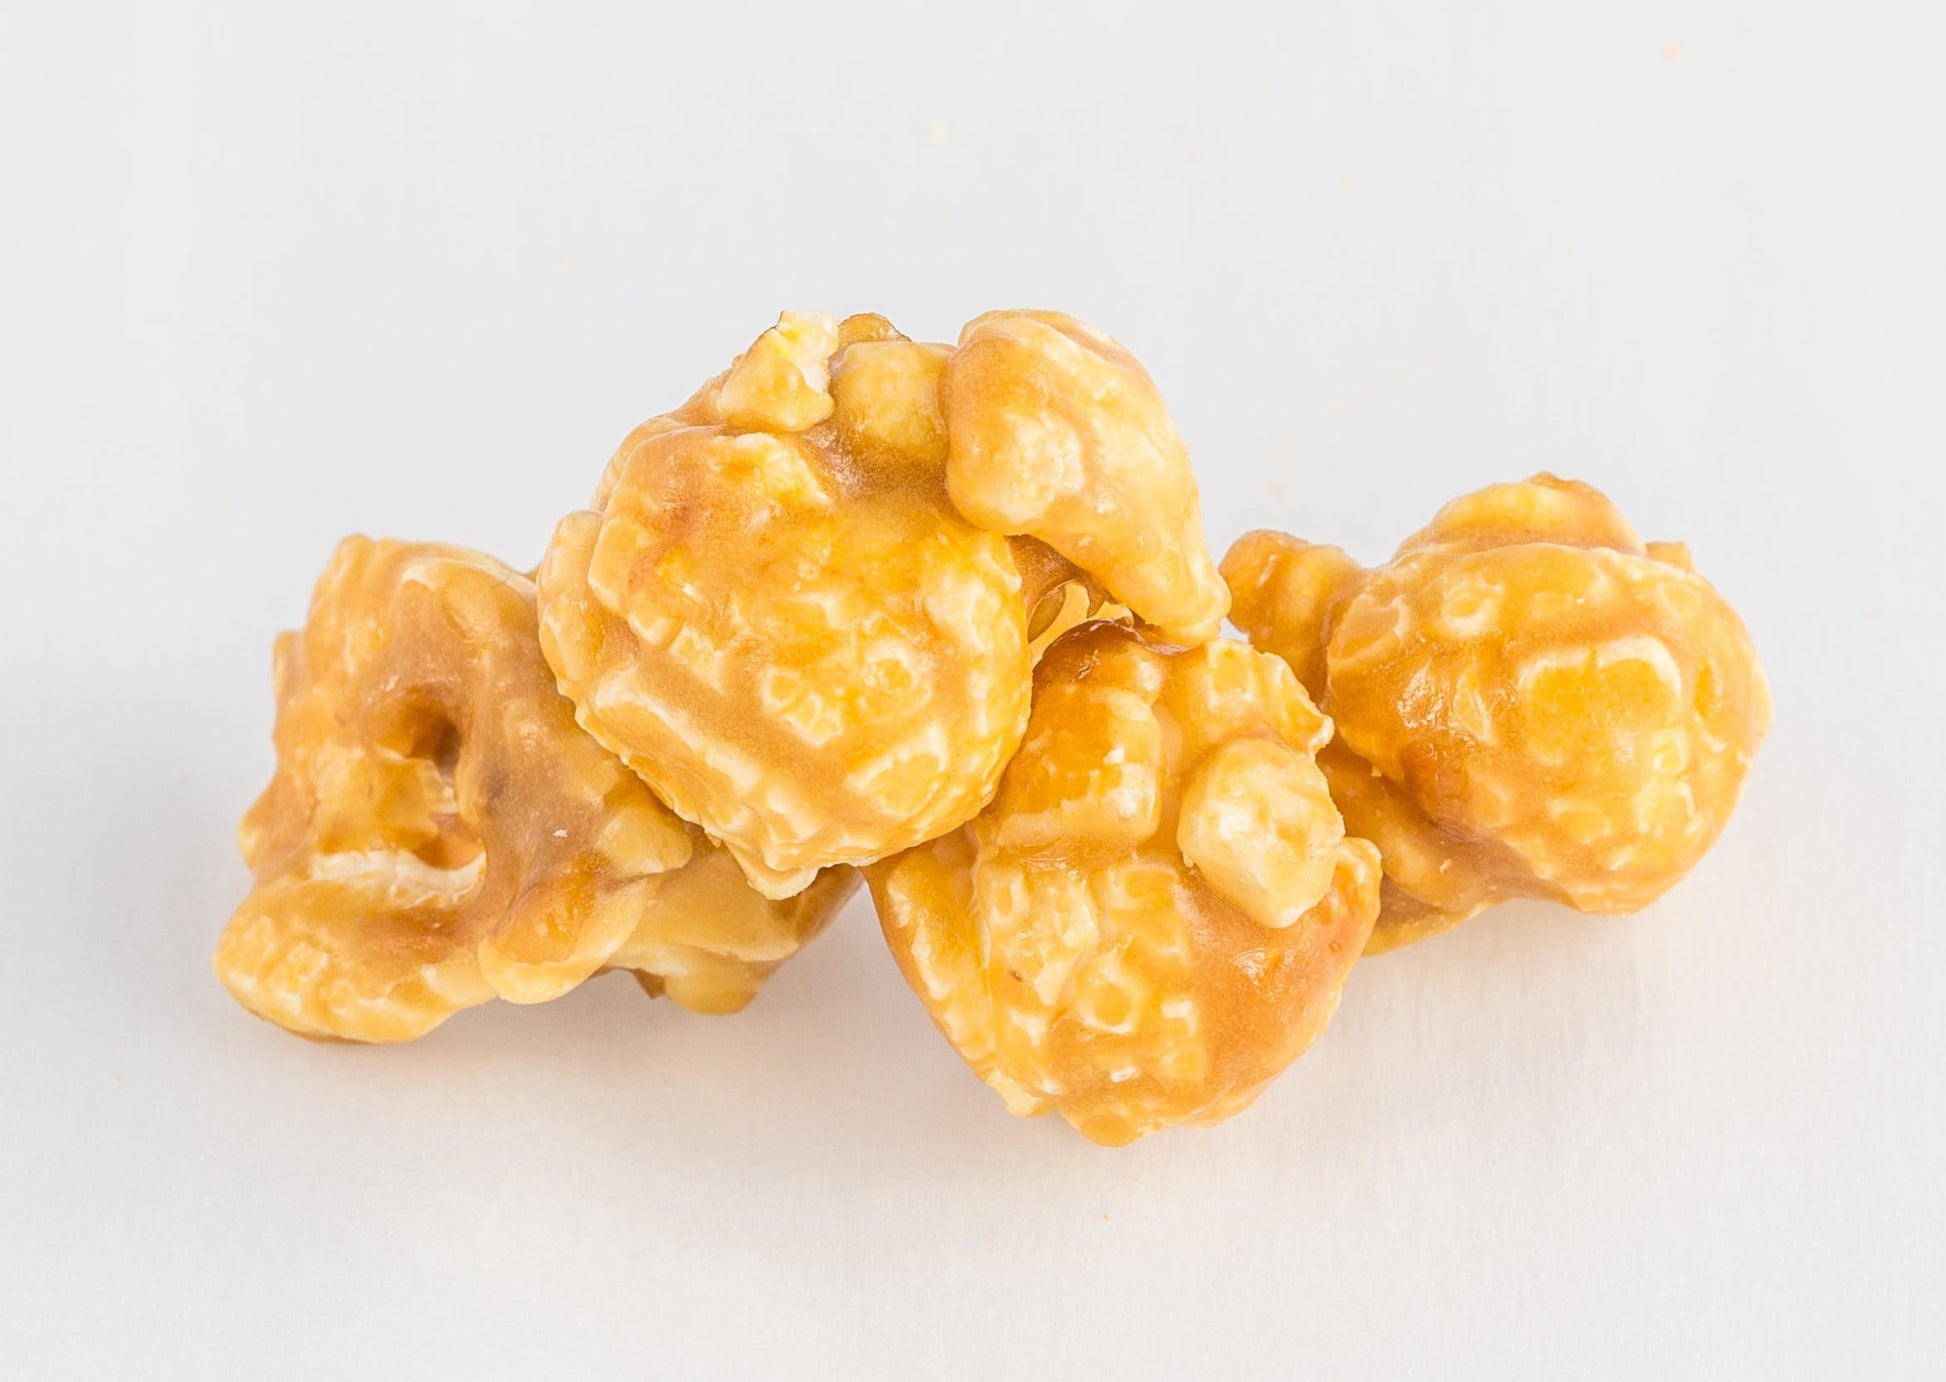 A stack of four caramel-coated popped popcorn kernels.